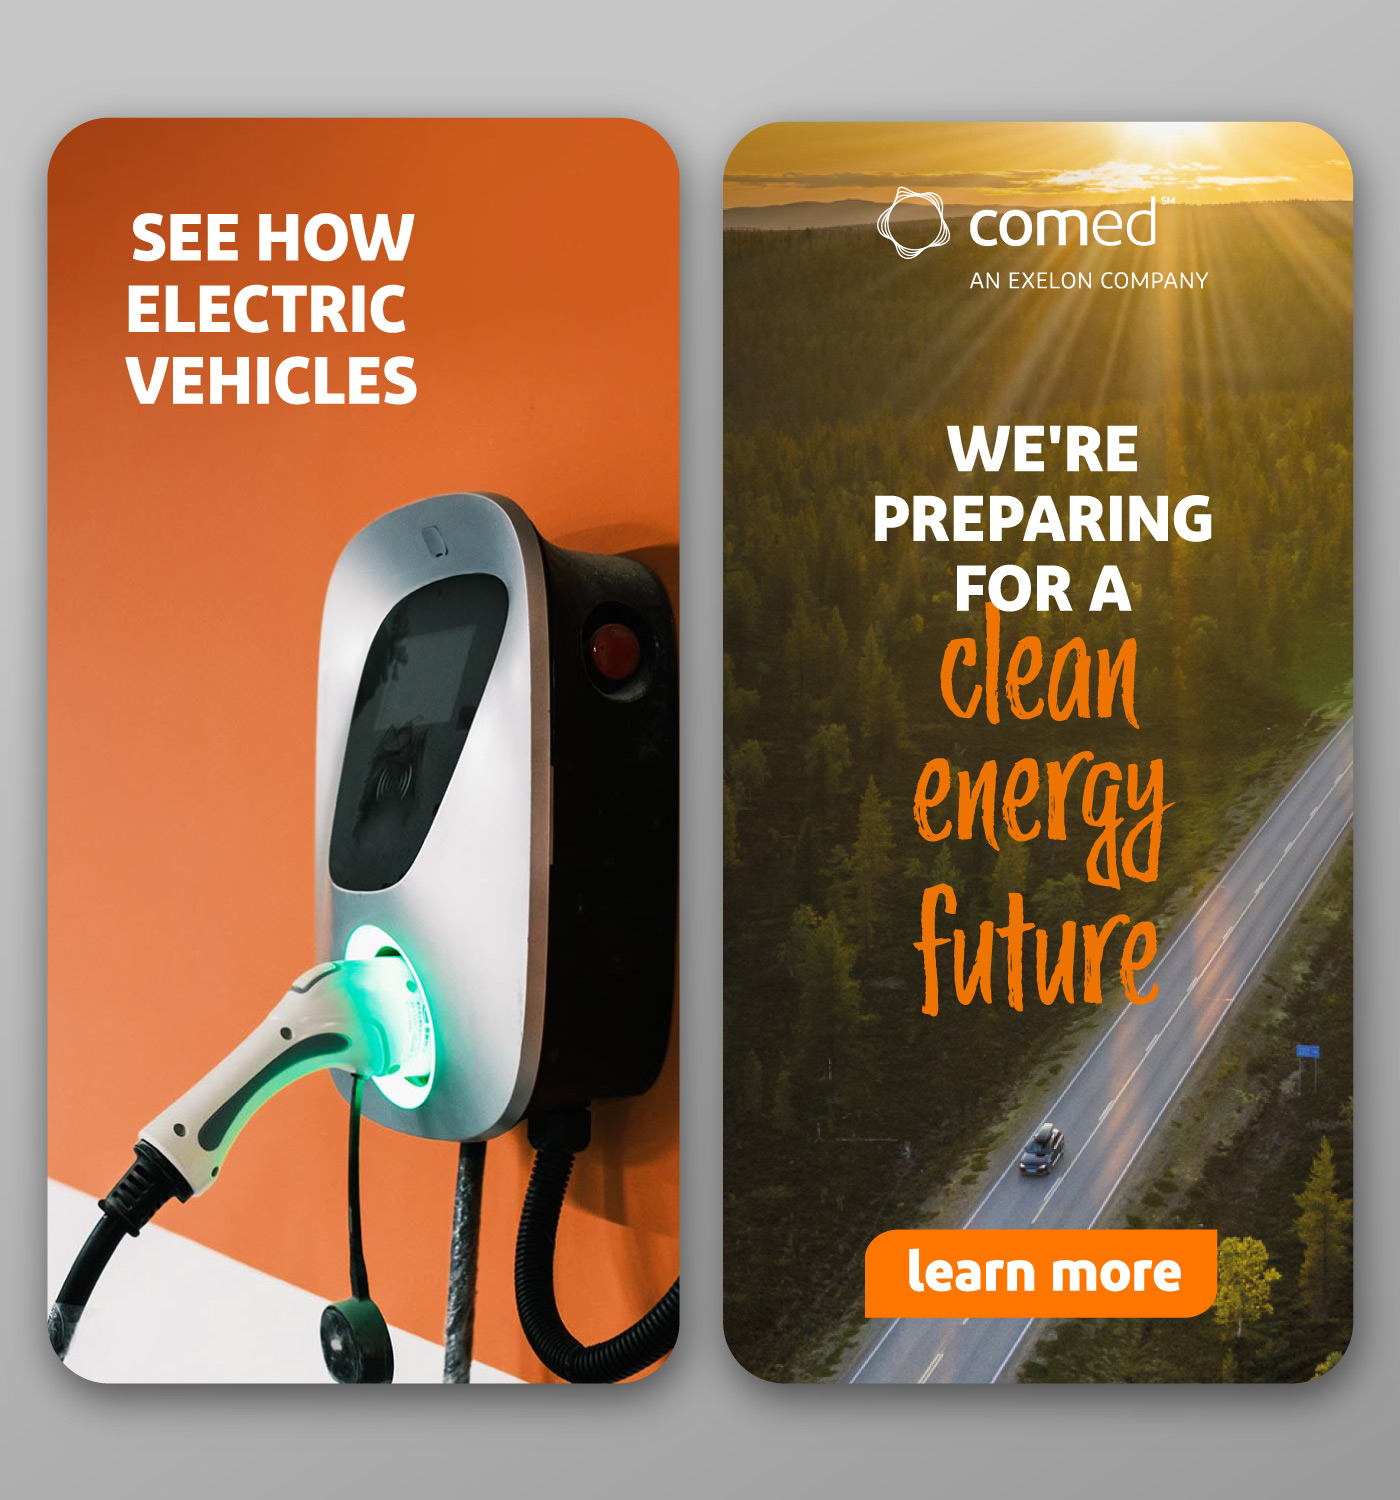 Comed – Clean Energy